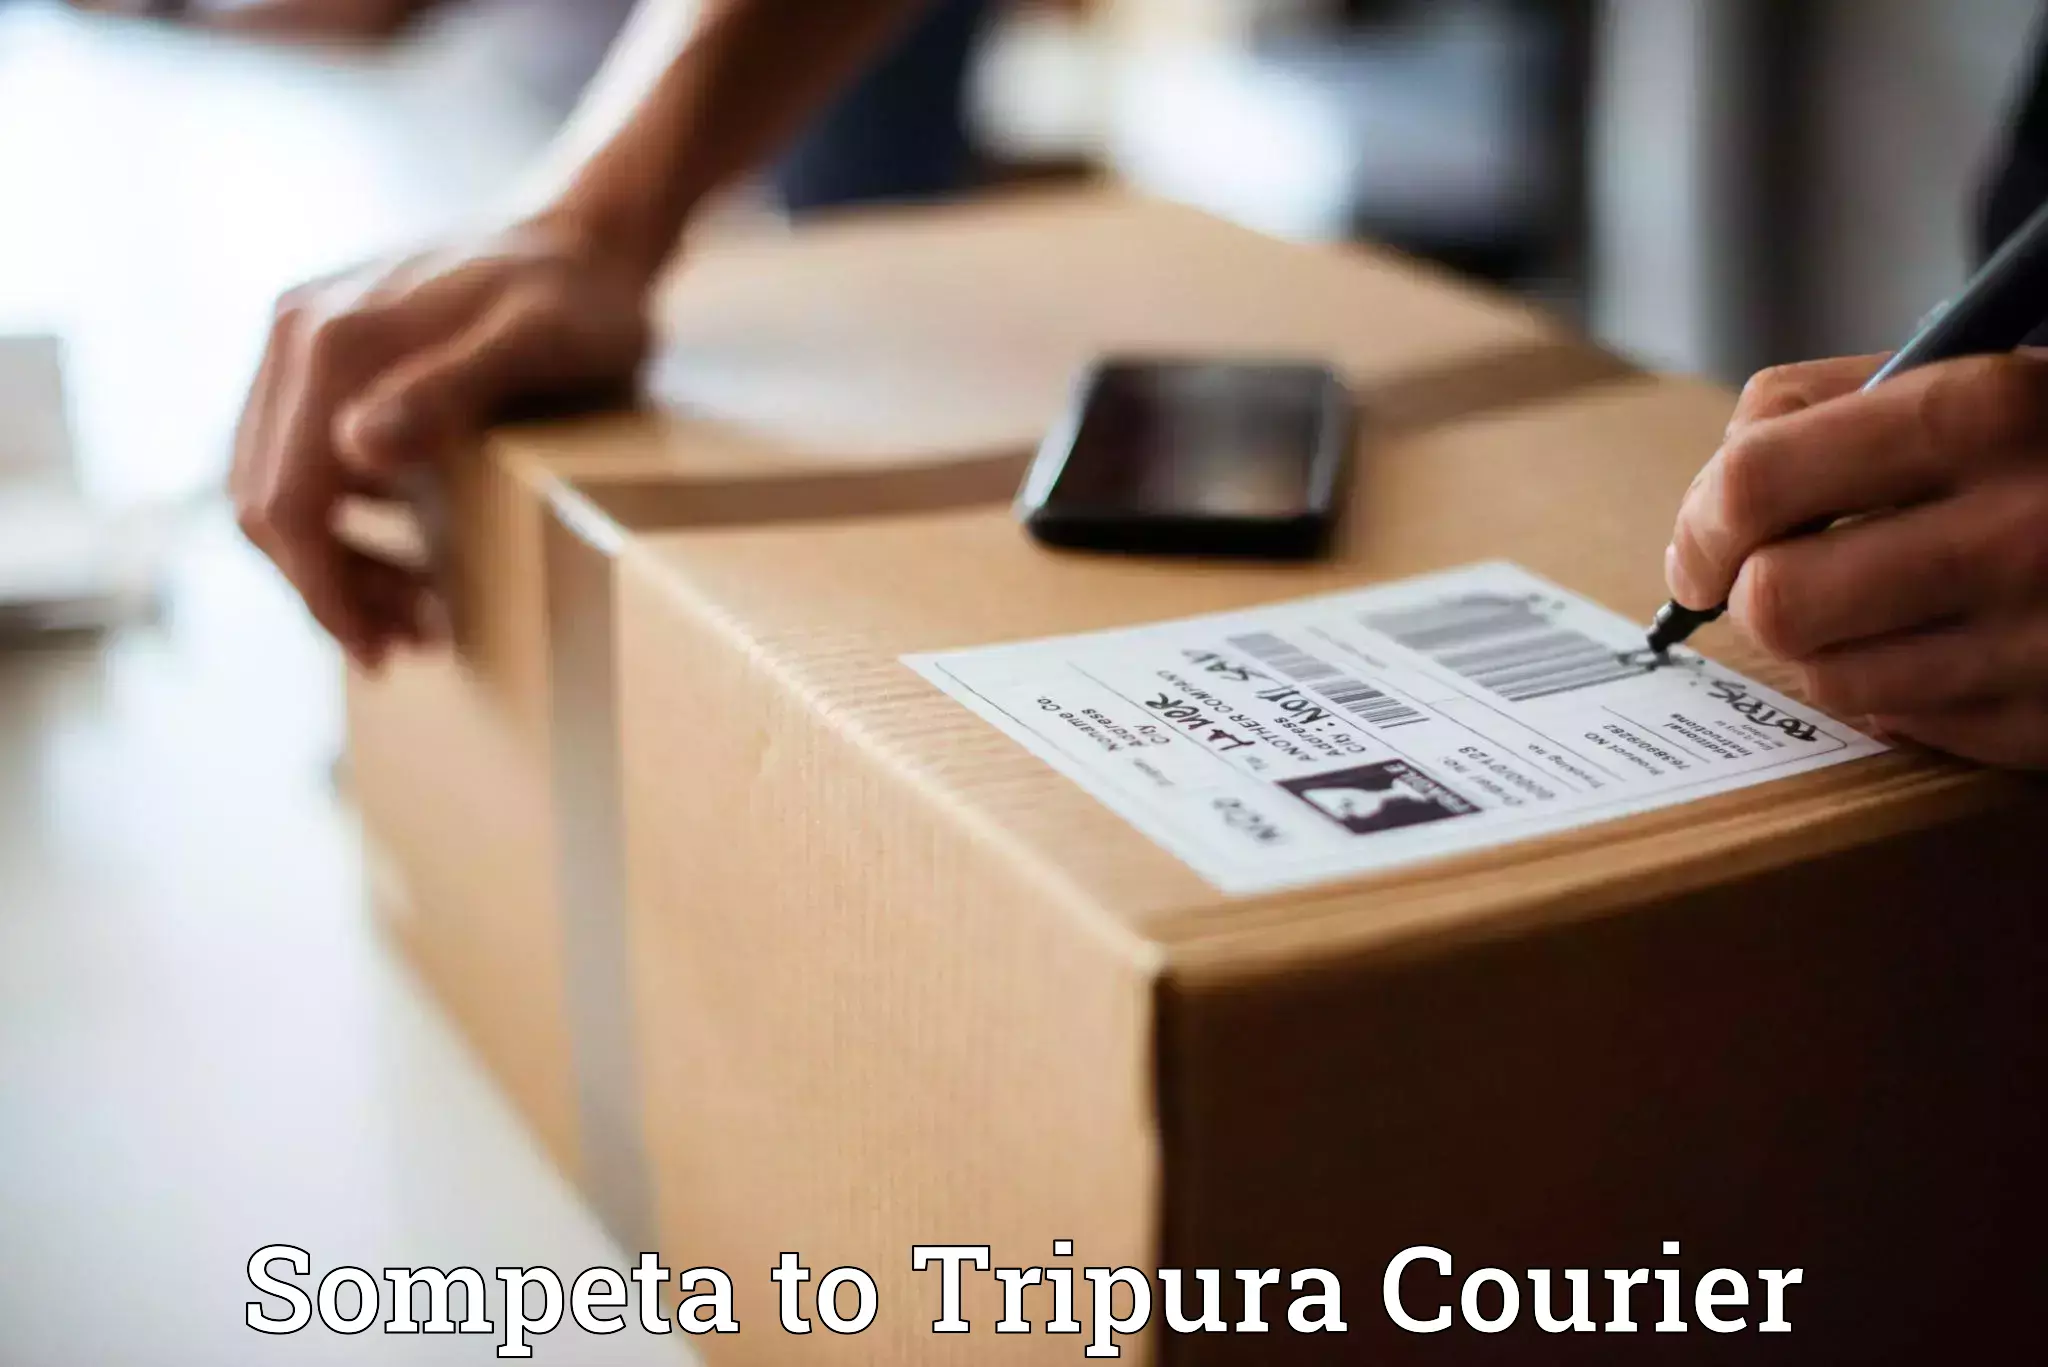 Enhanced shipping experience in Sompeta to Udaipur Tripura